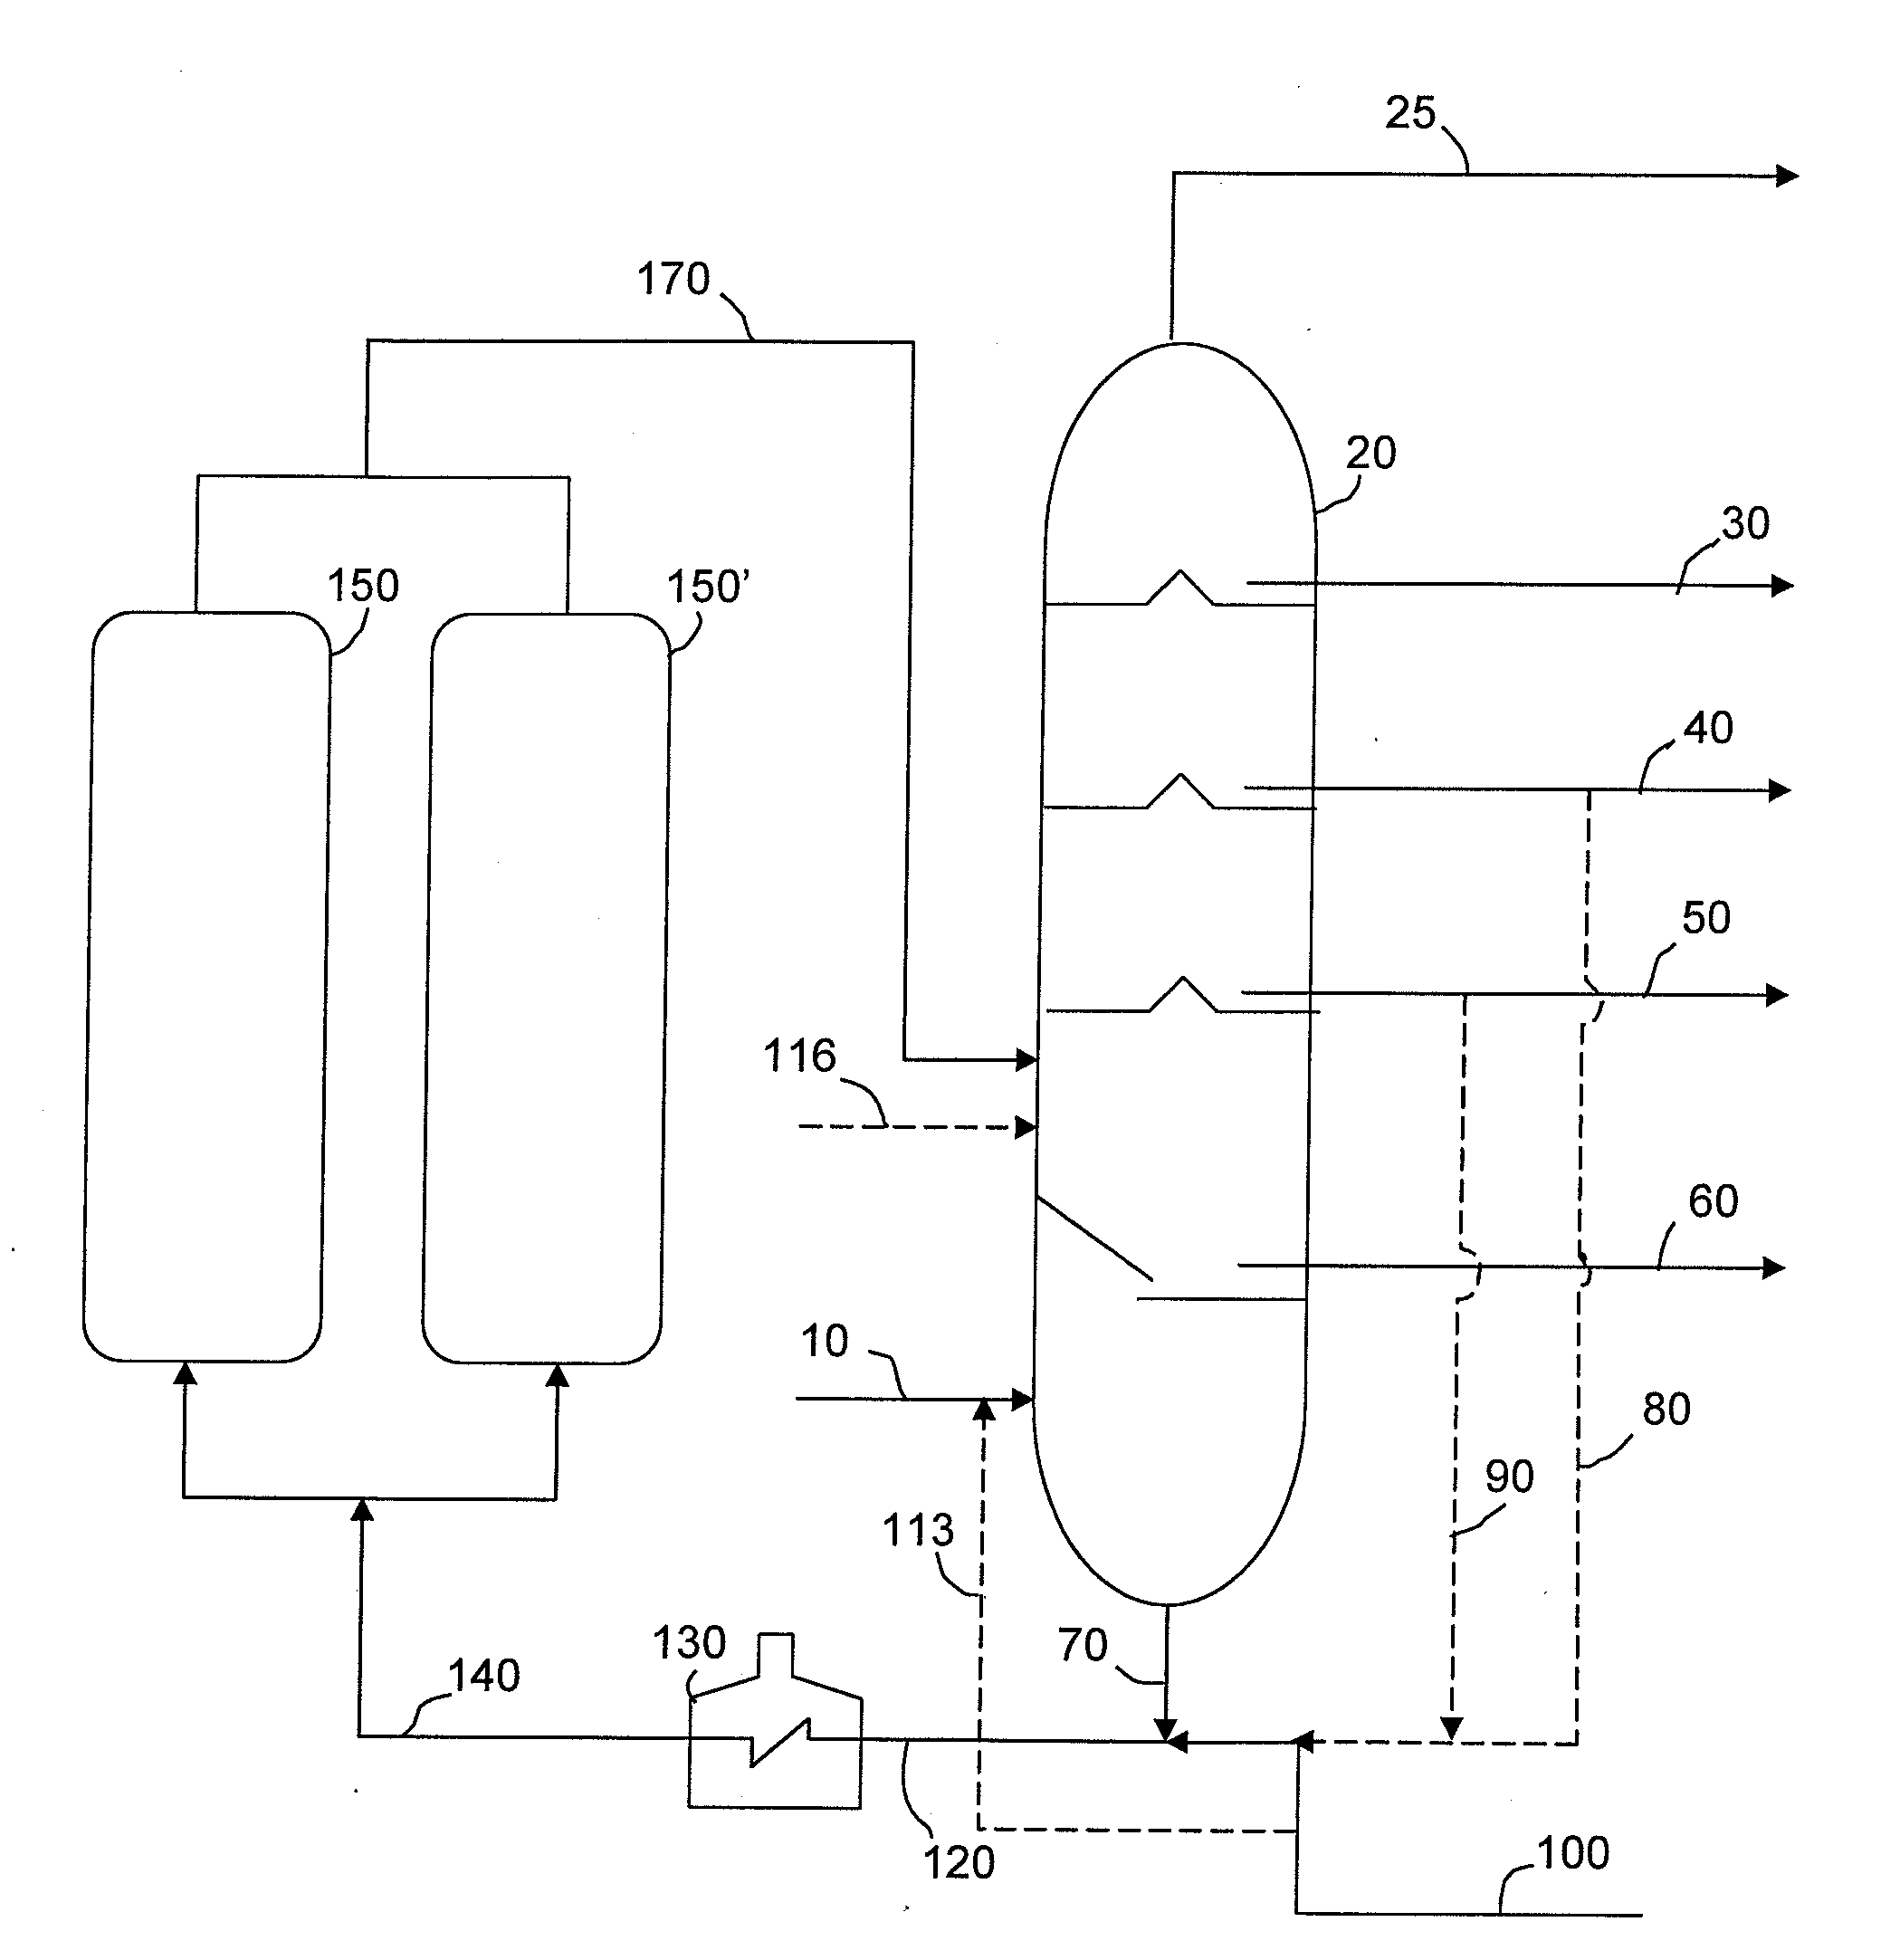 Method for Reducing Fouling of Coker Furnaces